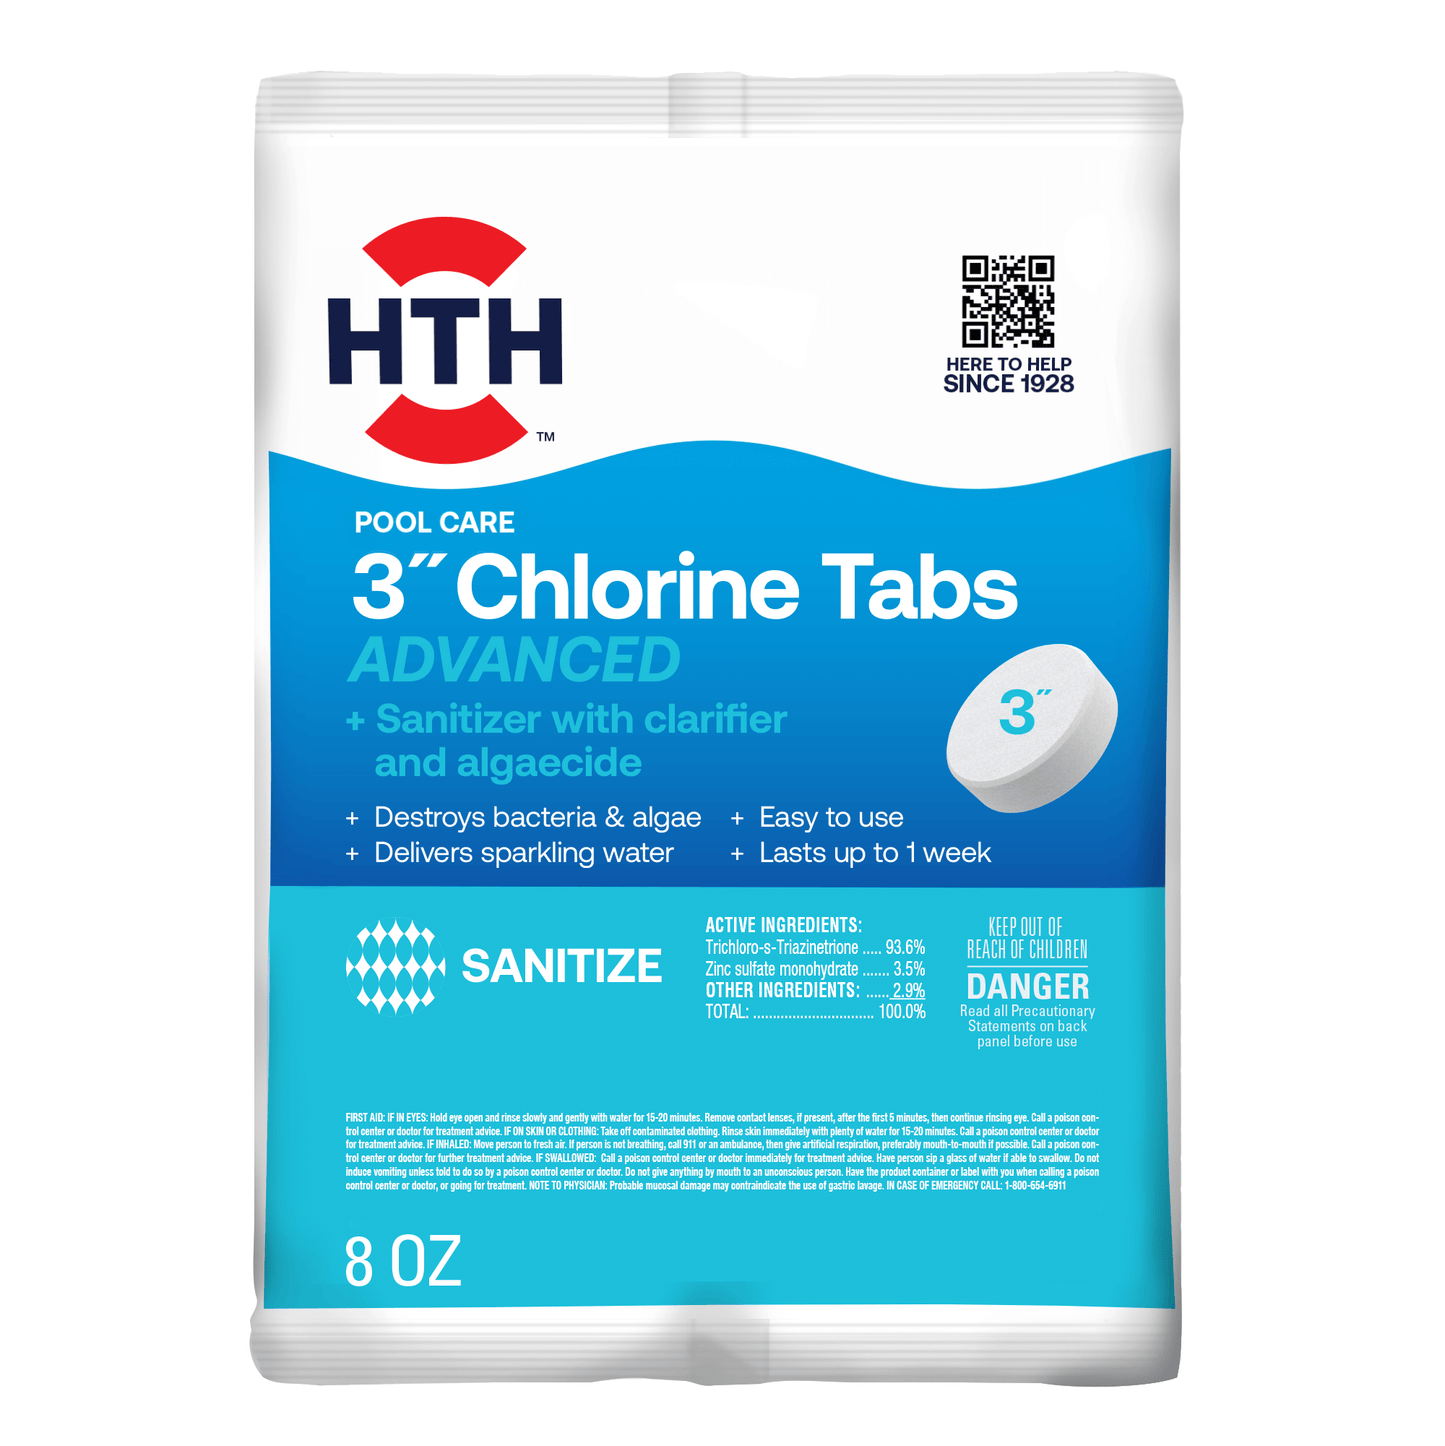 A bag of HTH Pools three inch chlorine tablets for pool treatments